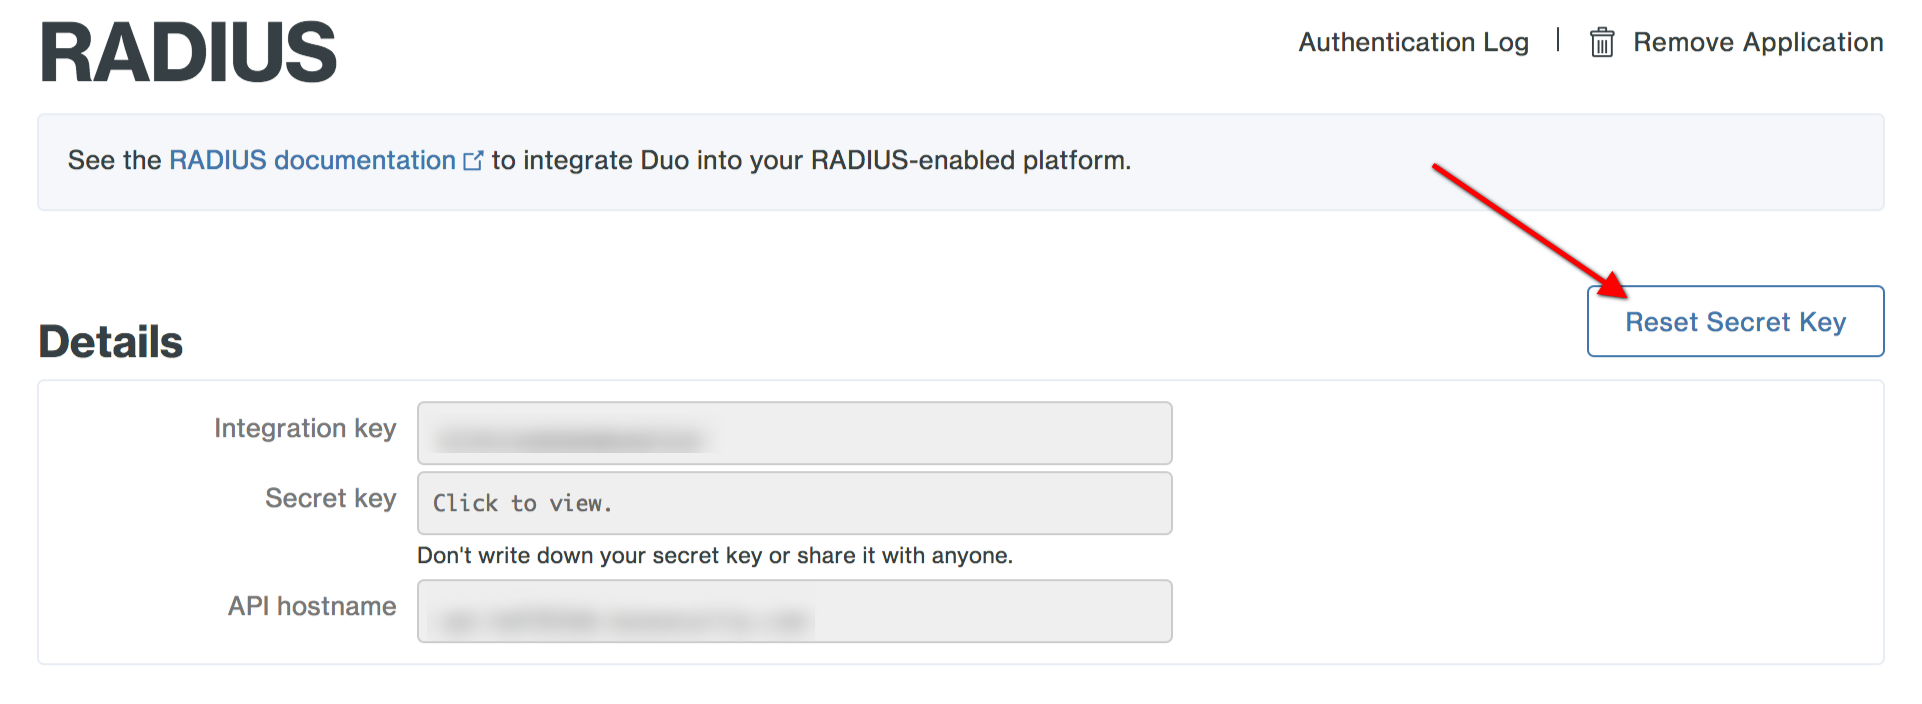 How Do I Reset The Secret Key For A Duo Protected Application